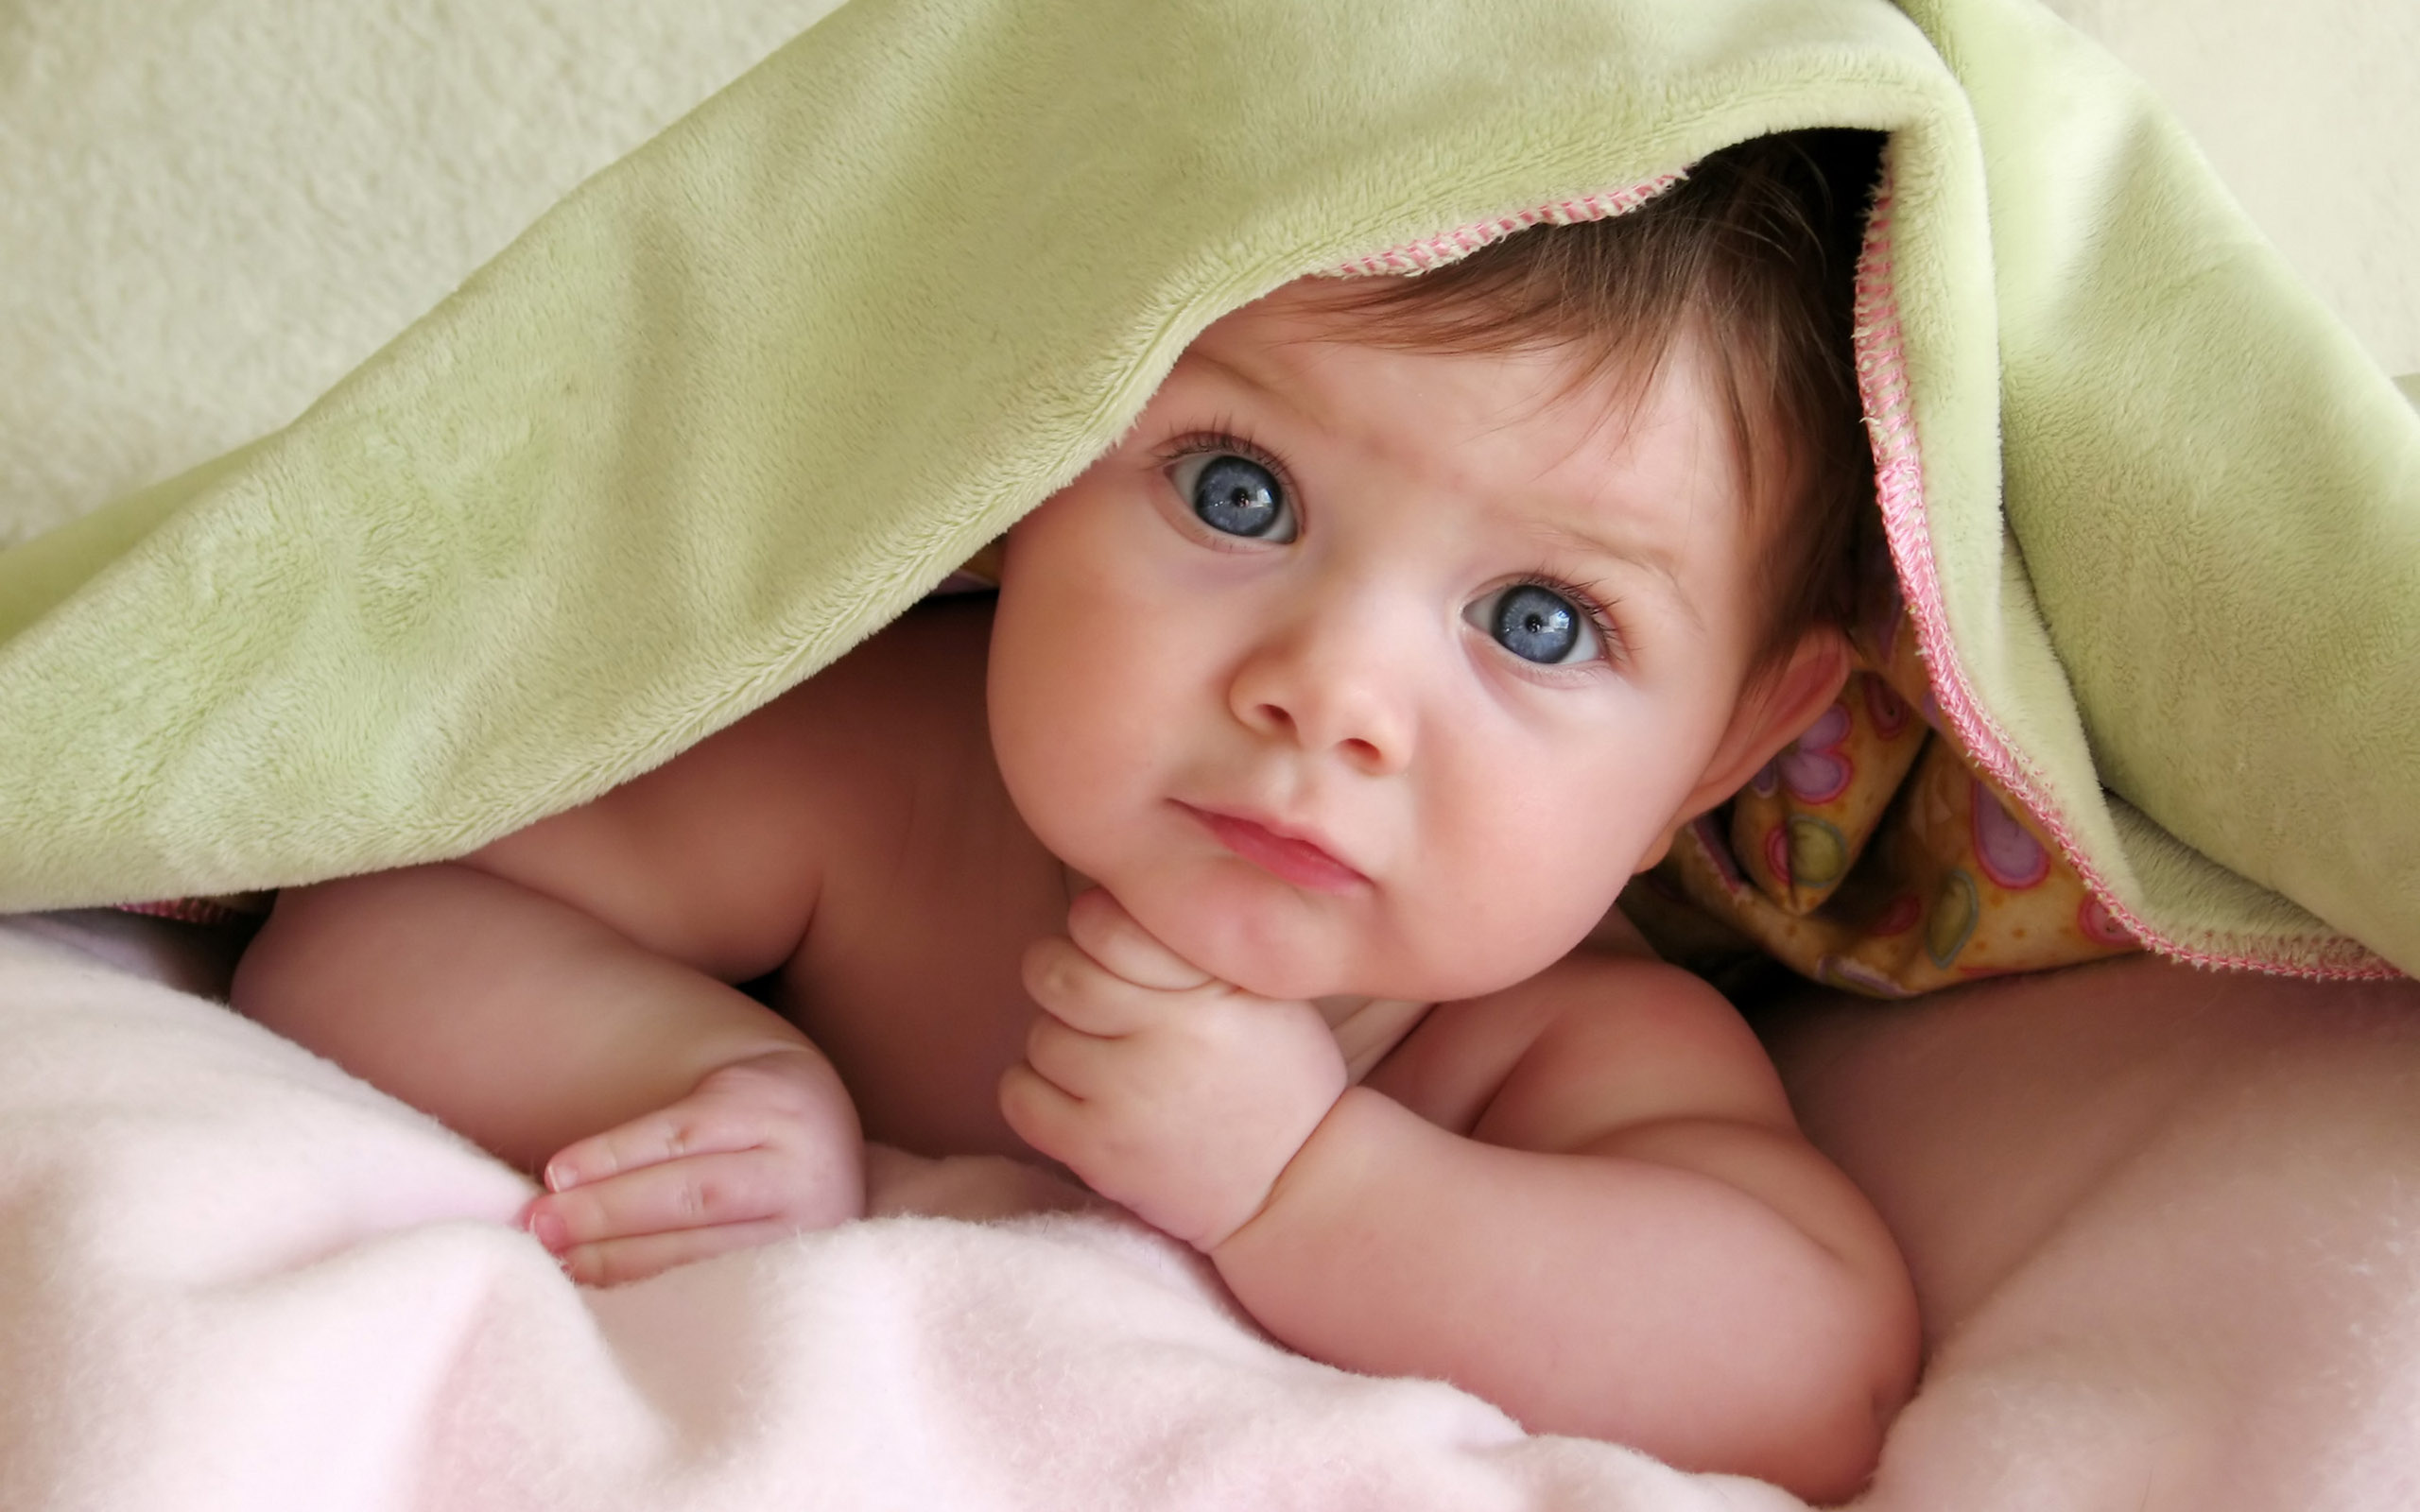 Cute baby Wallpapers   HD Wallpapers 78794